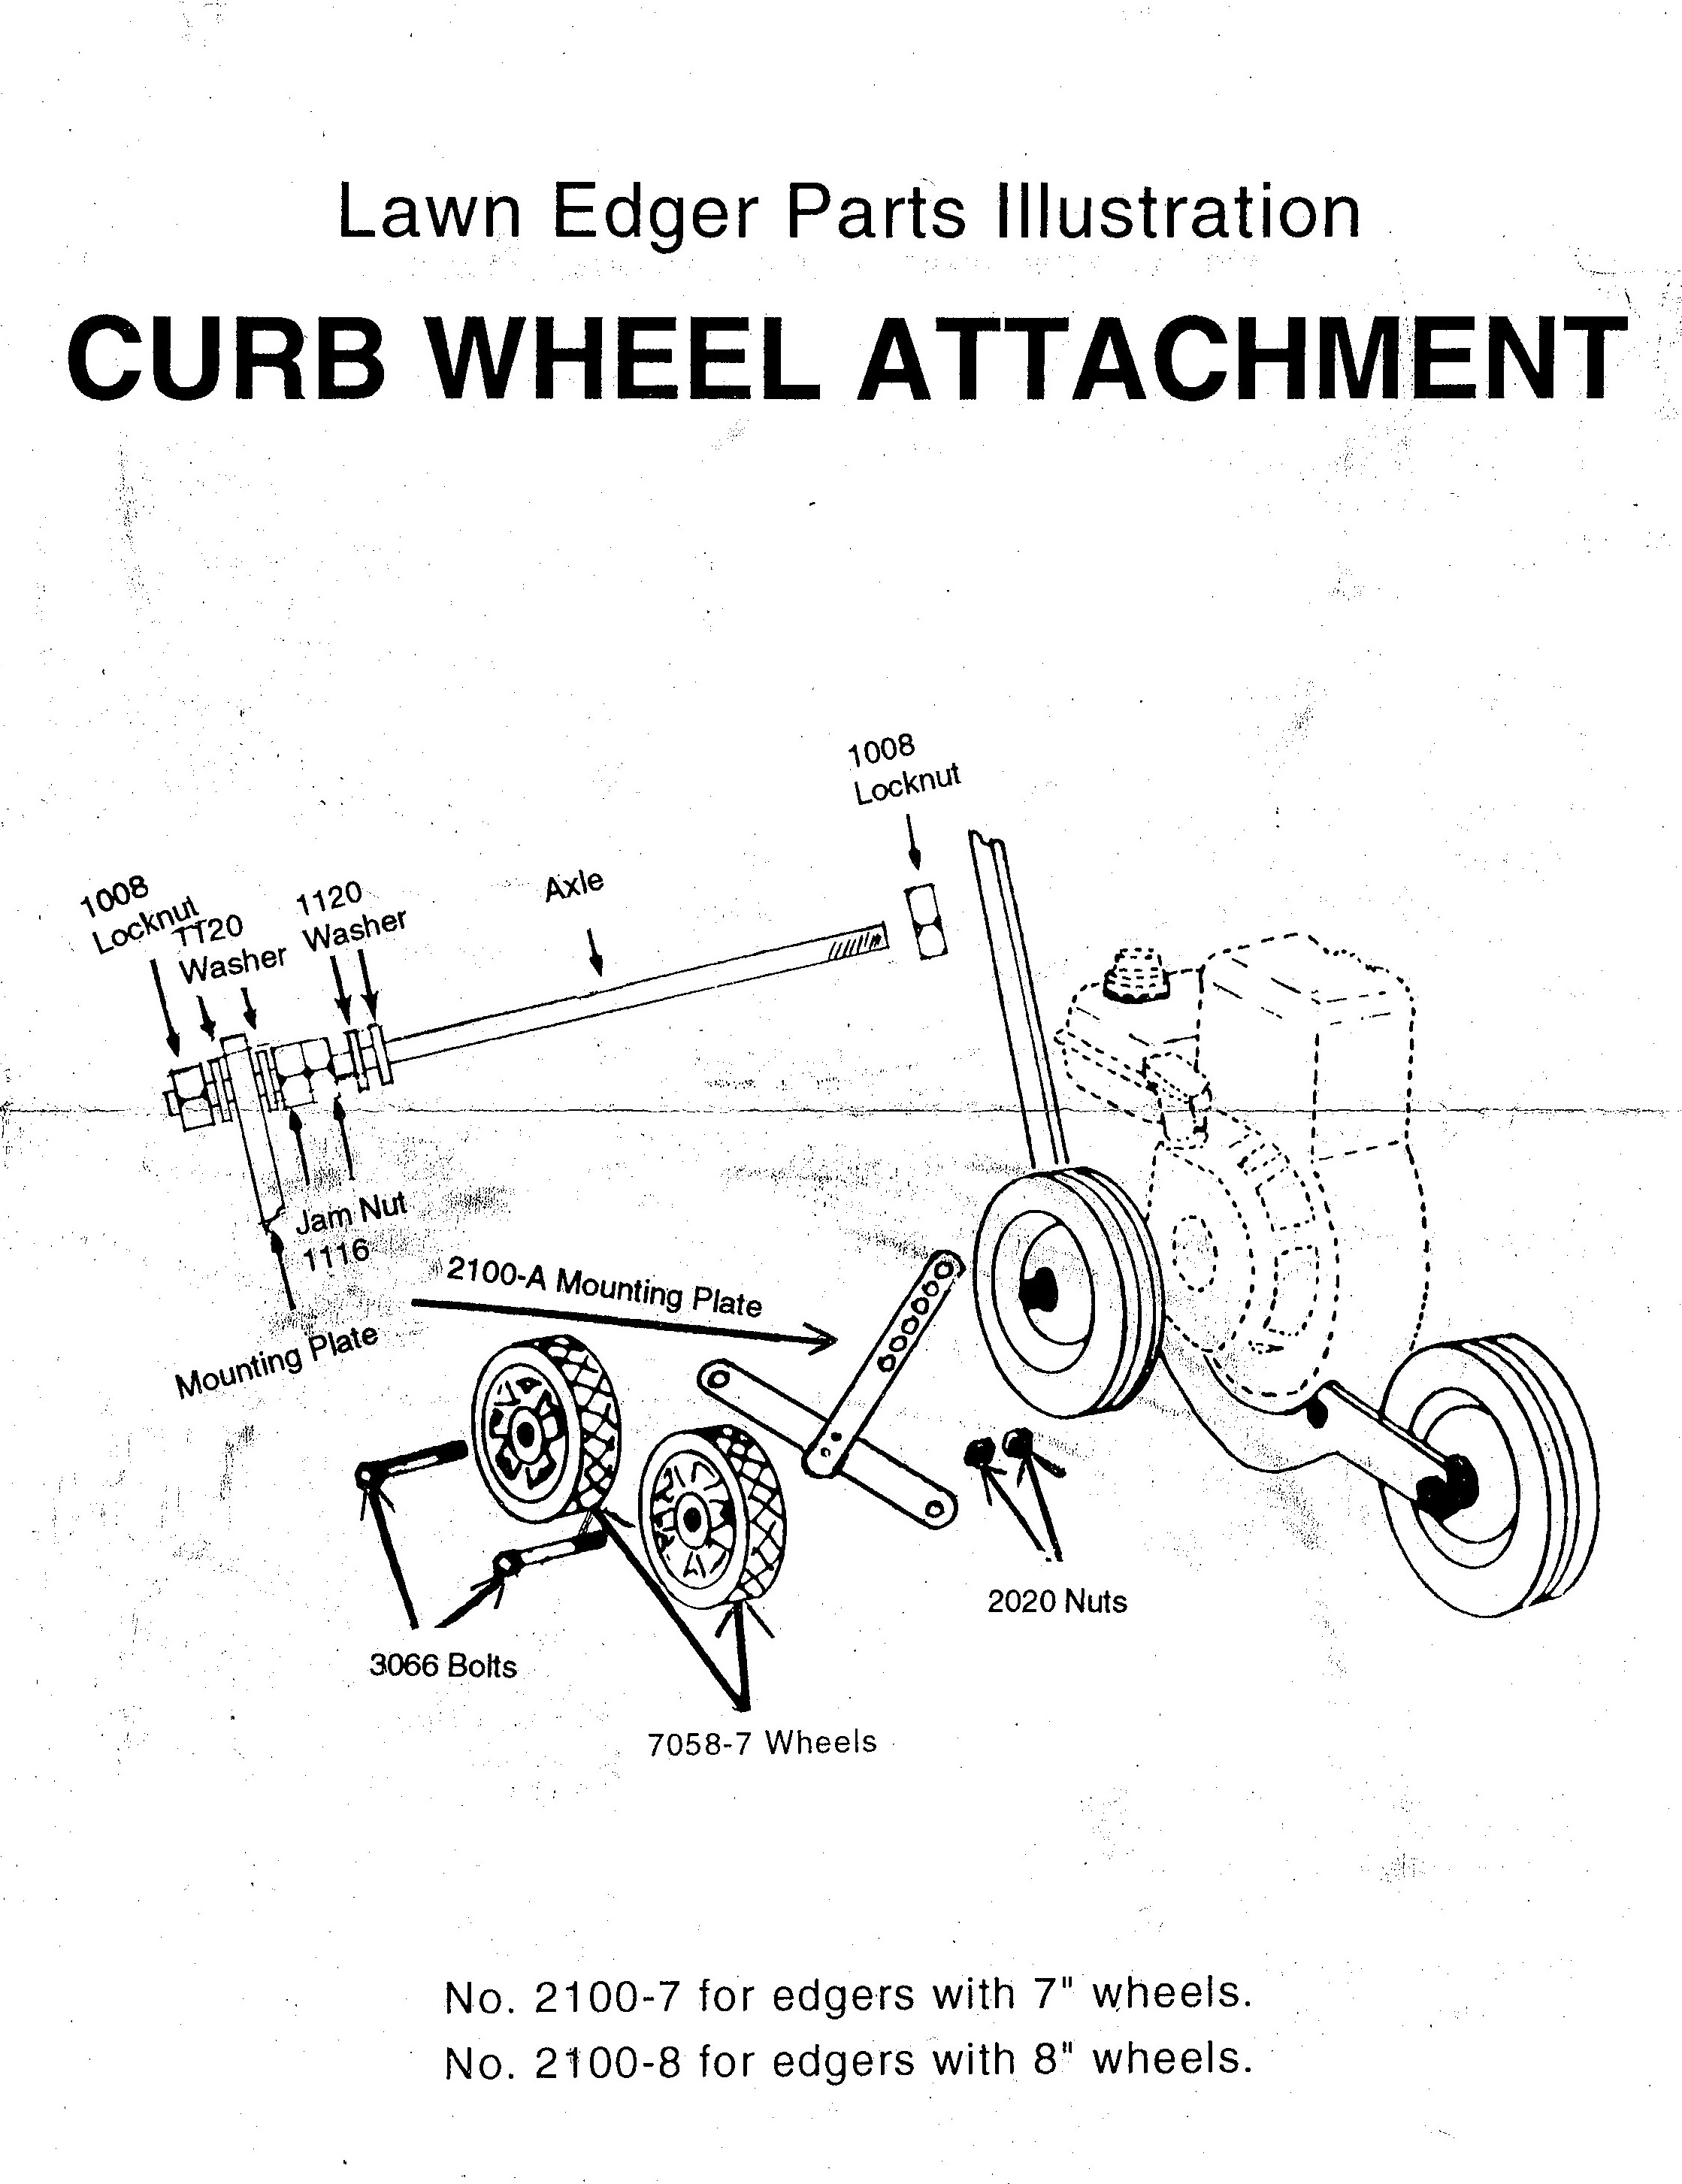 Curb Wheel Attachment 2101 Mclane Edgers With 7 or 8 Inch Wheels